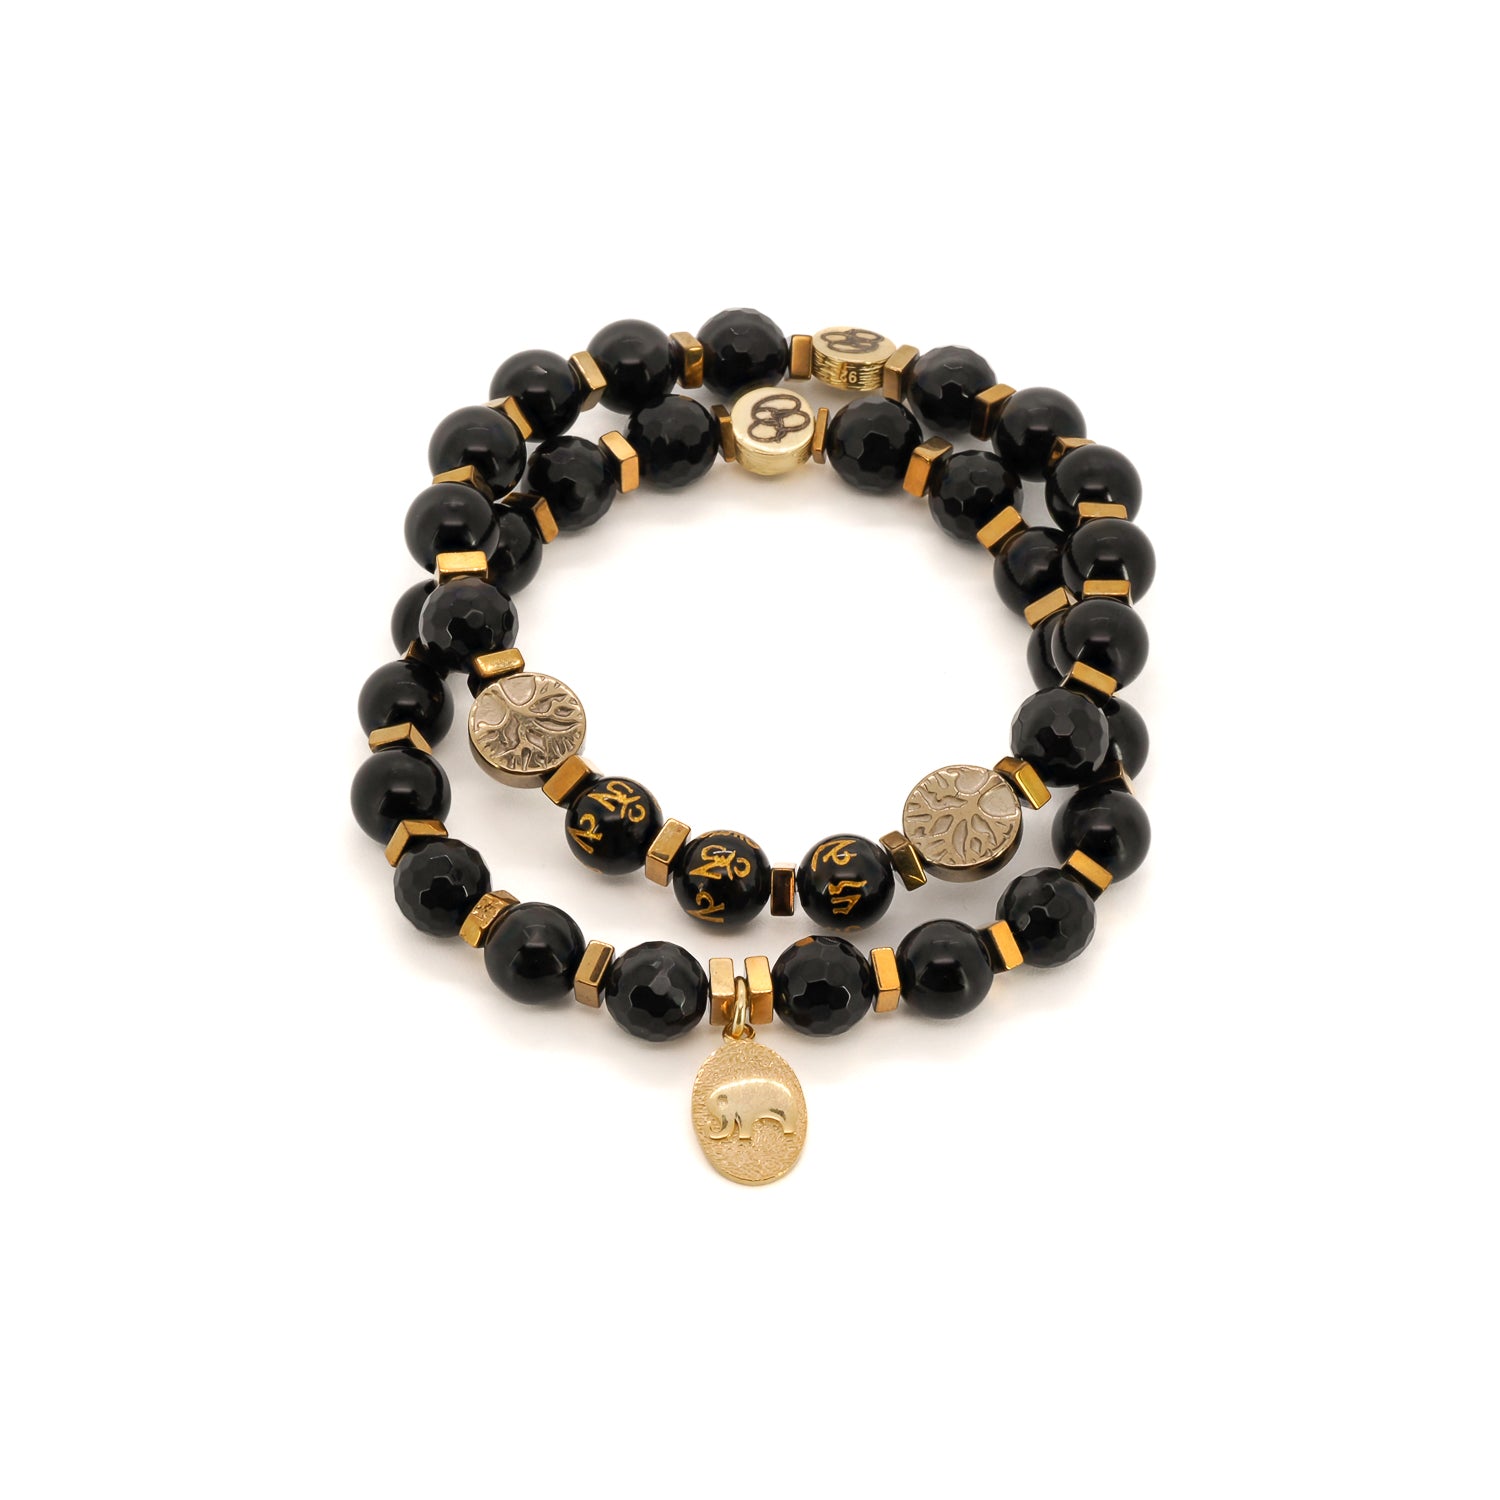 The Black Onyx Gold Elephant Yoga Journey Bracelet Set is a beautiful and unique collection of handmade jewelry designed to support mindfulness and spiritual growth.